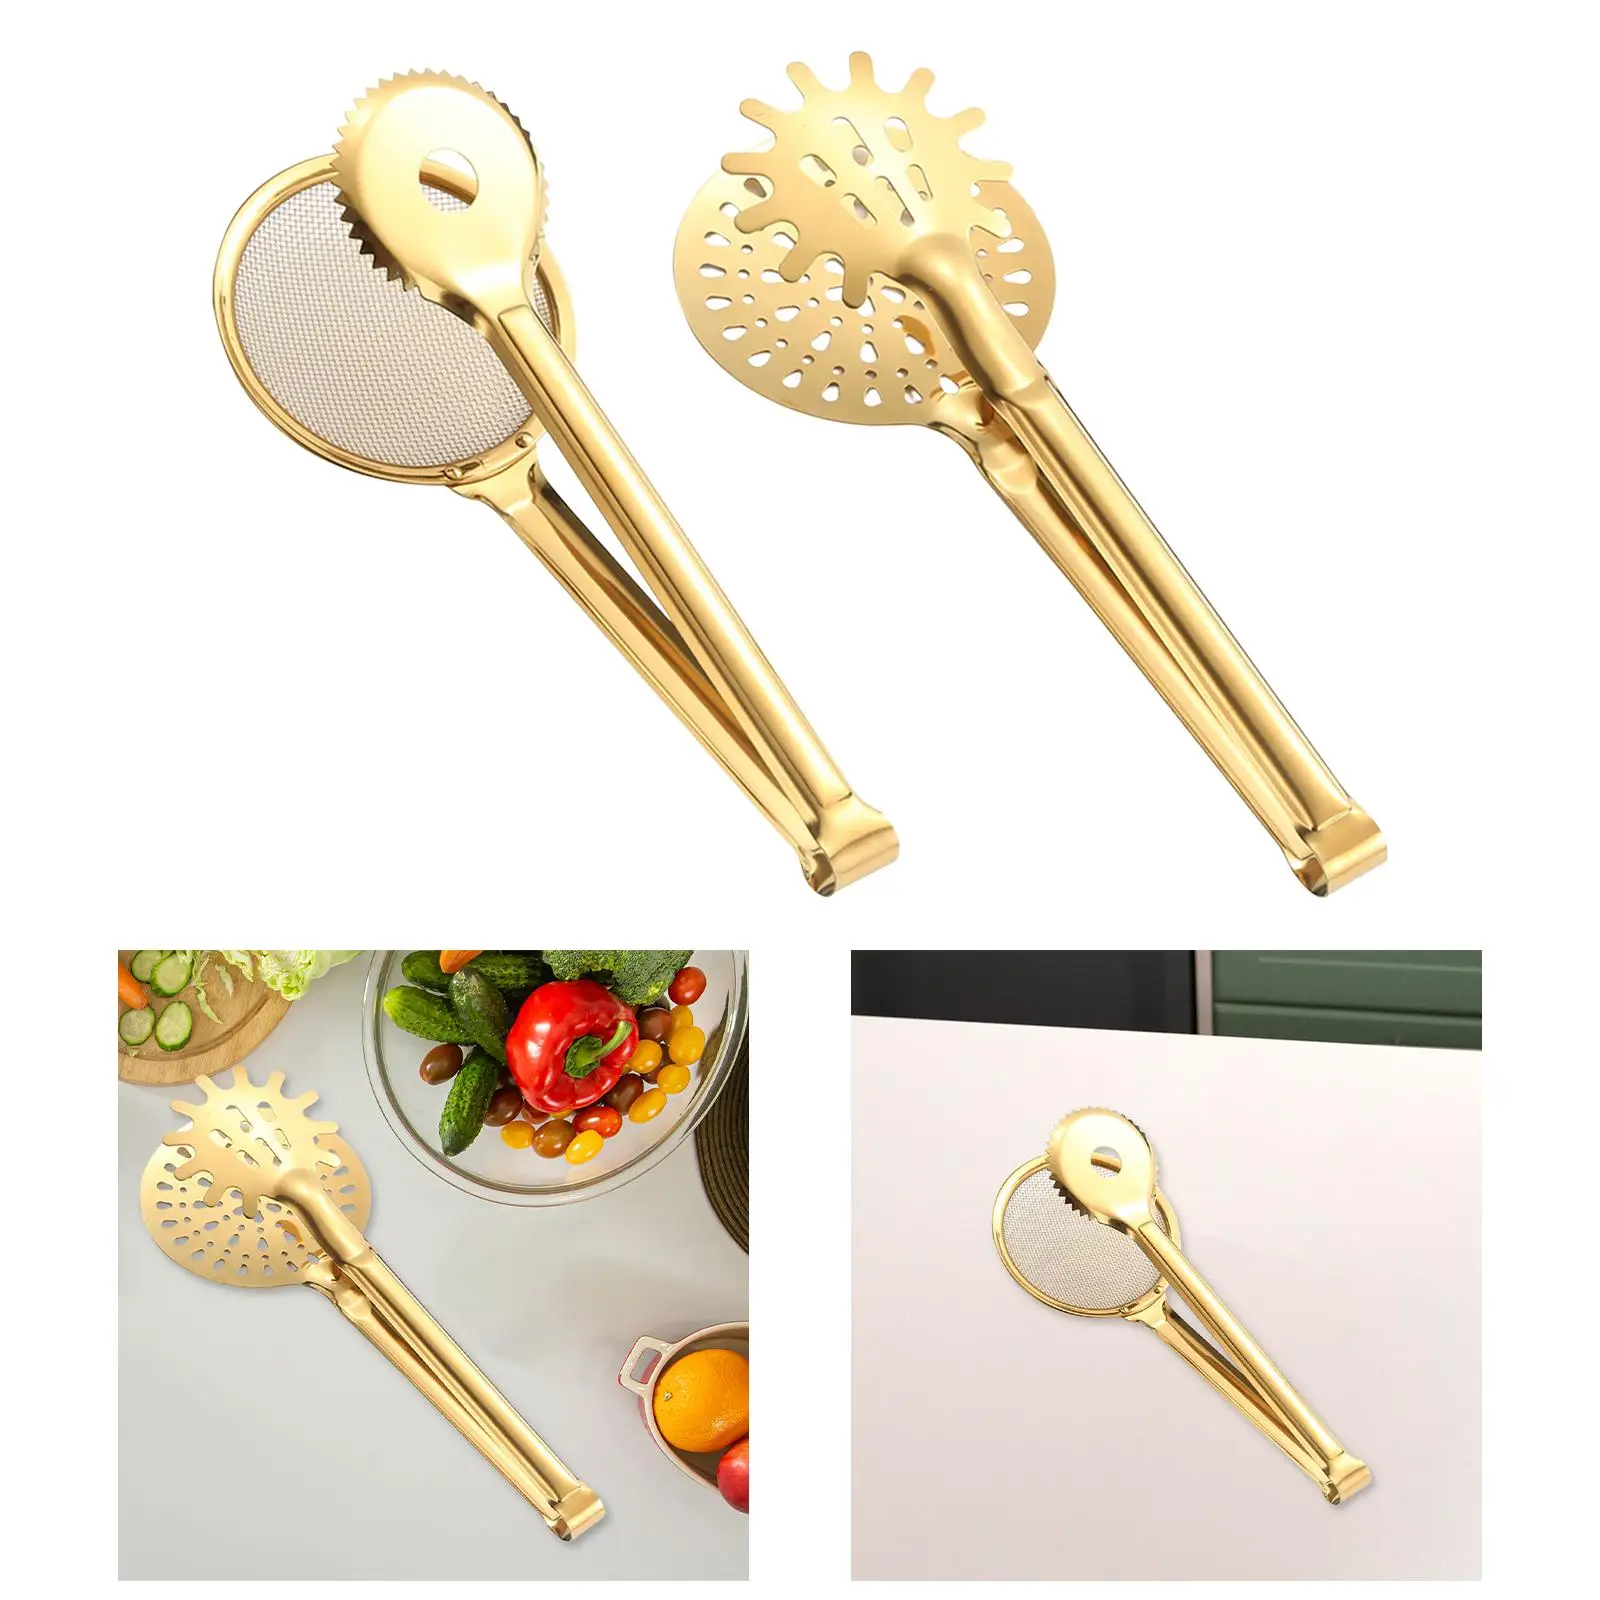 Strainer Tongs 2 in 1 Tools Oil Skimmer Colander with Clip Water Filter Tongs for Frying Cooking Spaghetti Meat